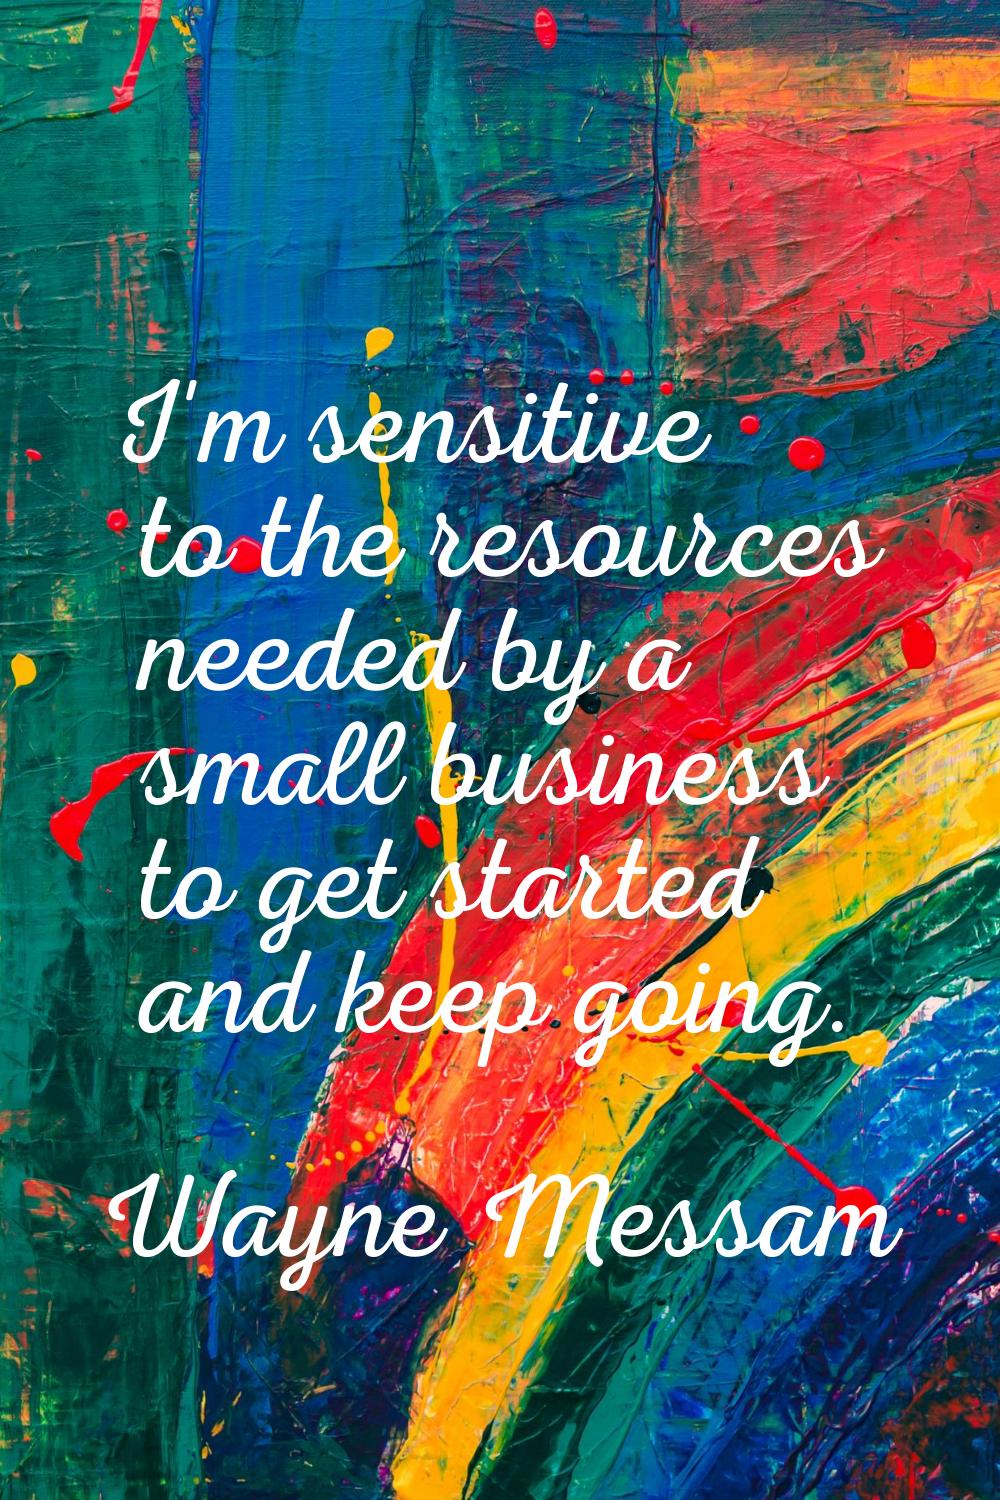 I'm sensitive to the resources needed by a small business to get started and keep going.